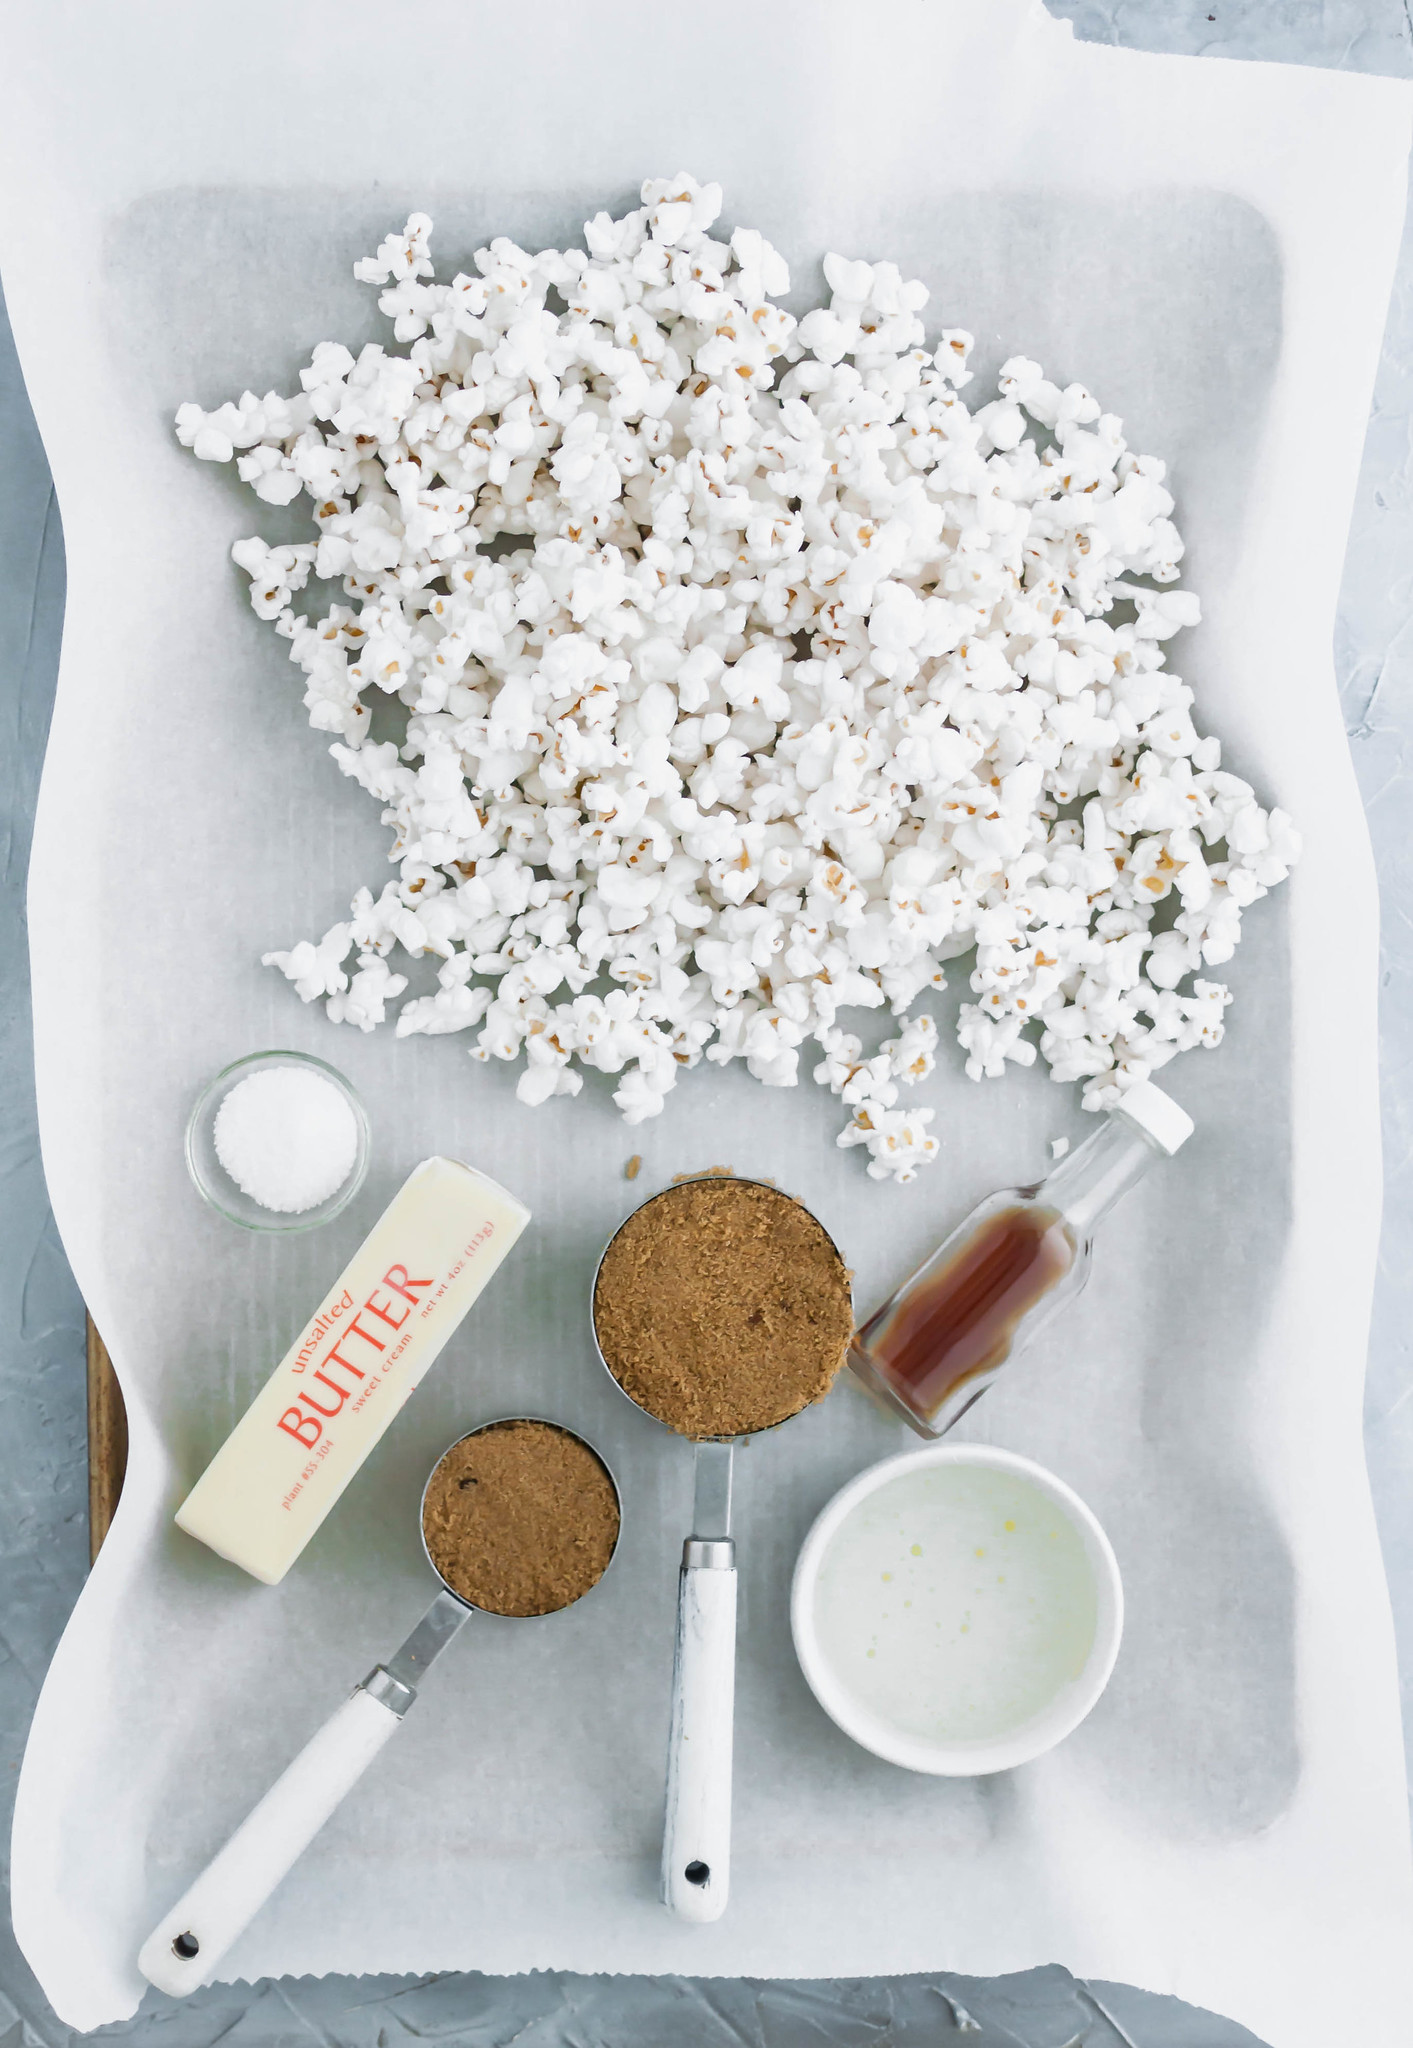 Ingredients needed for salted caramel corn on a baking sheet lined with parchment paper.